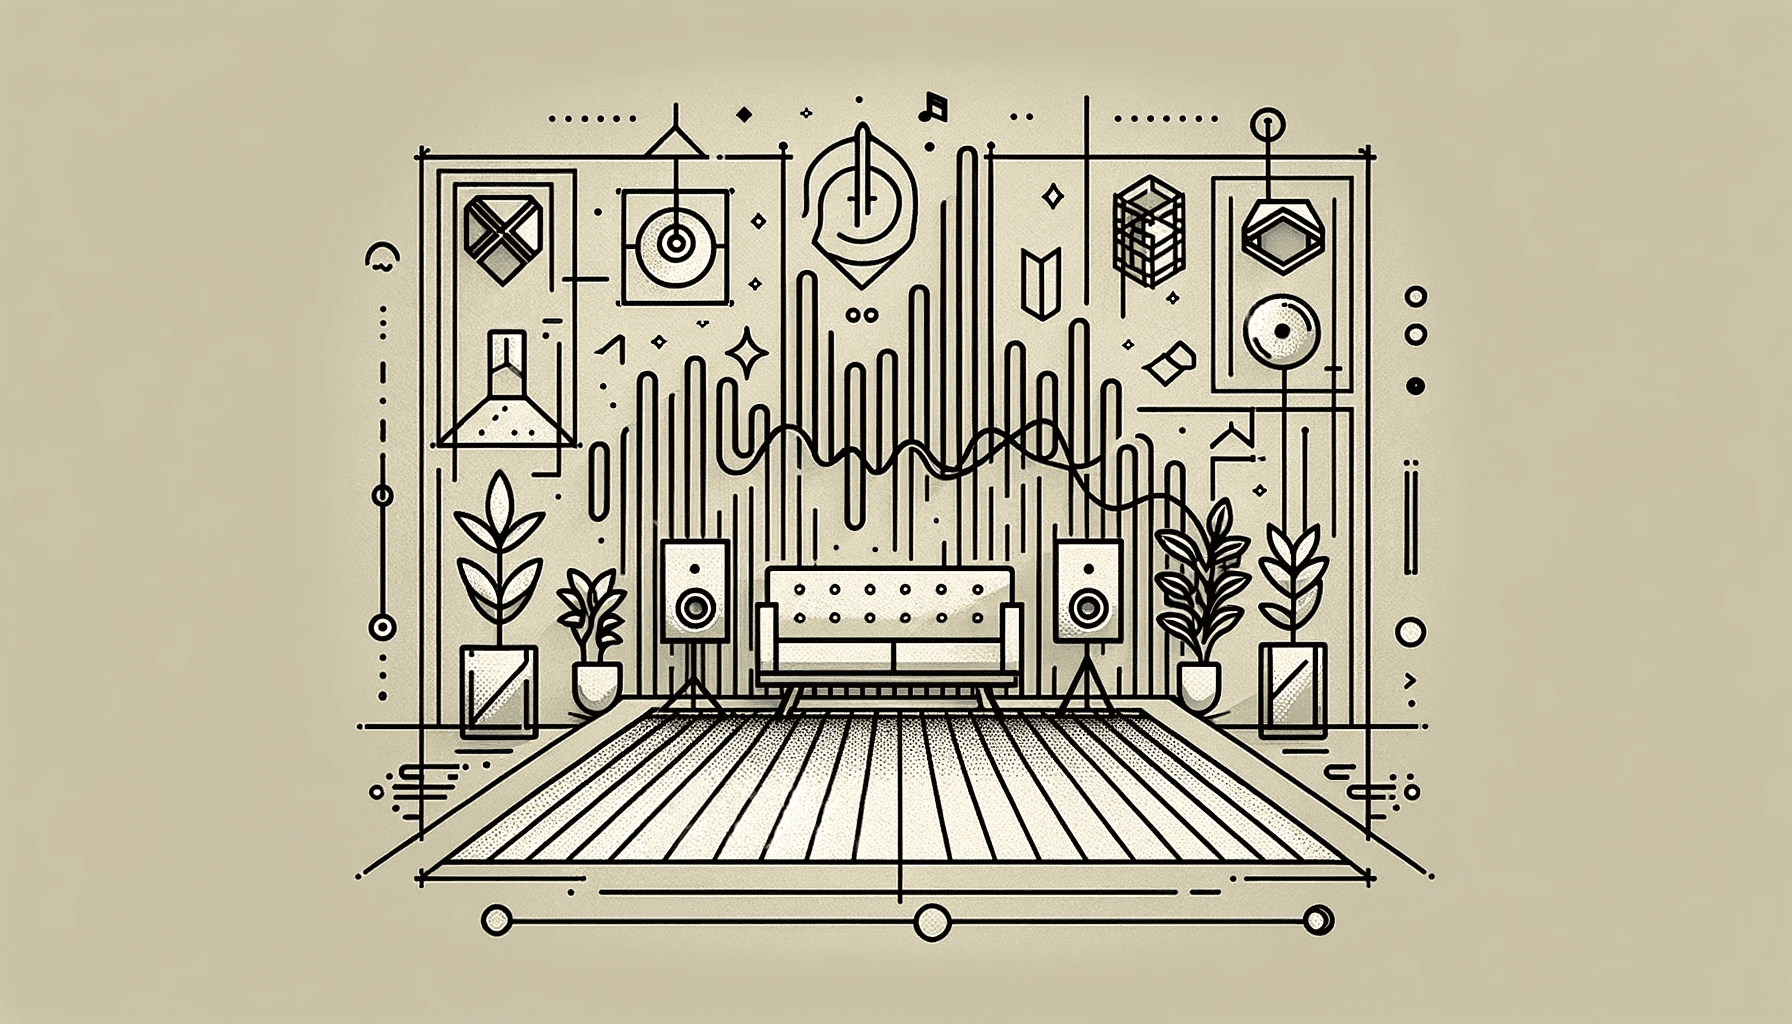 room acoustics, featuring stylized line art depicting sound waves, a geometric outline